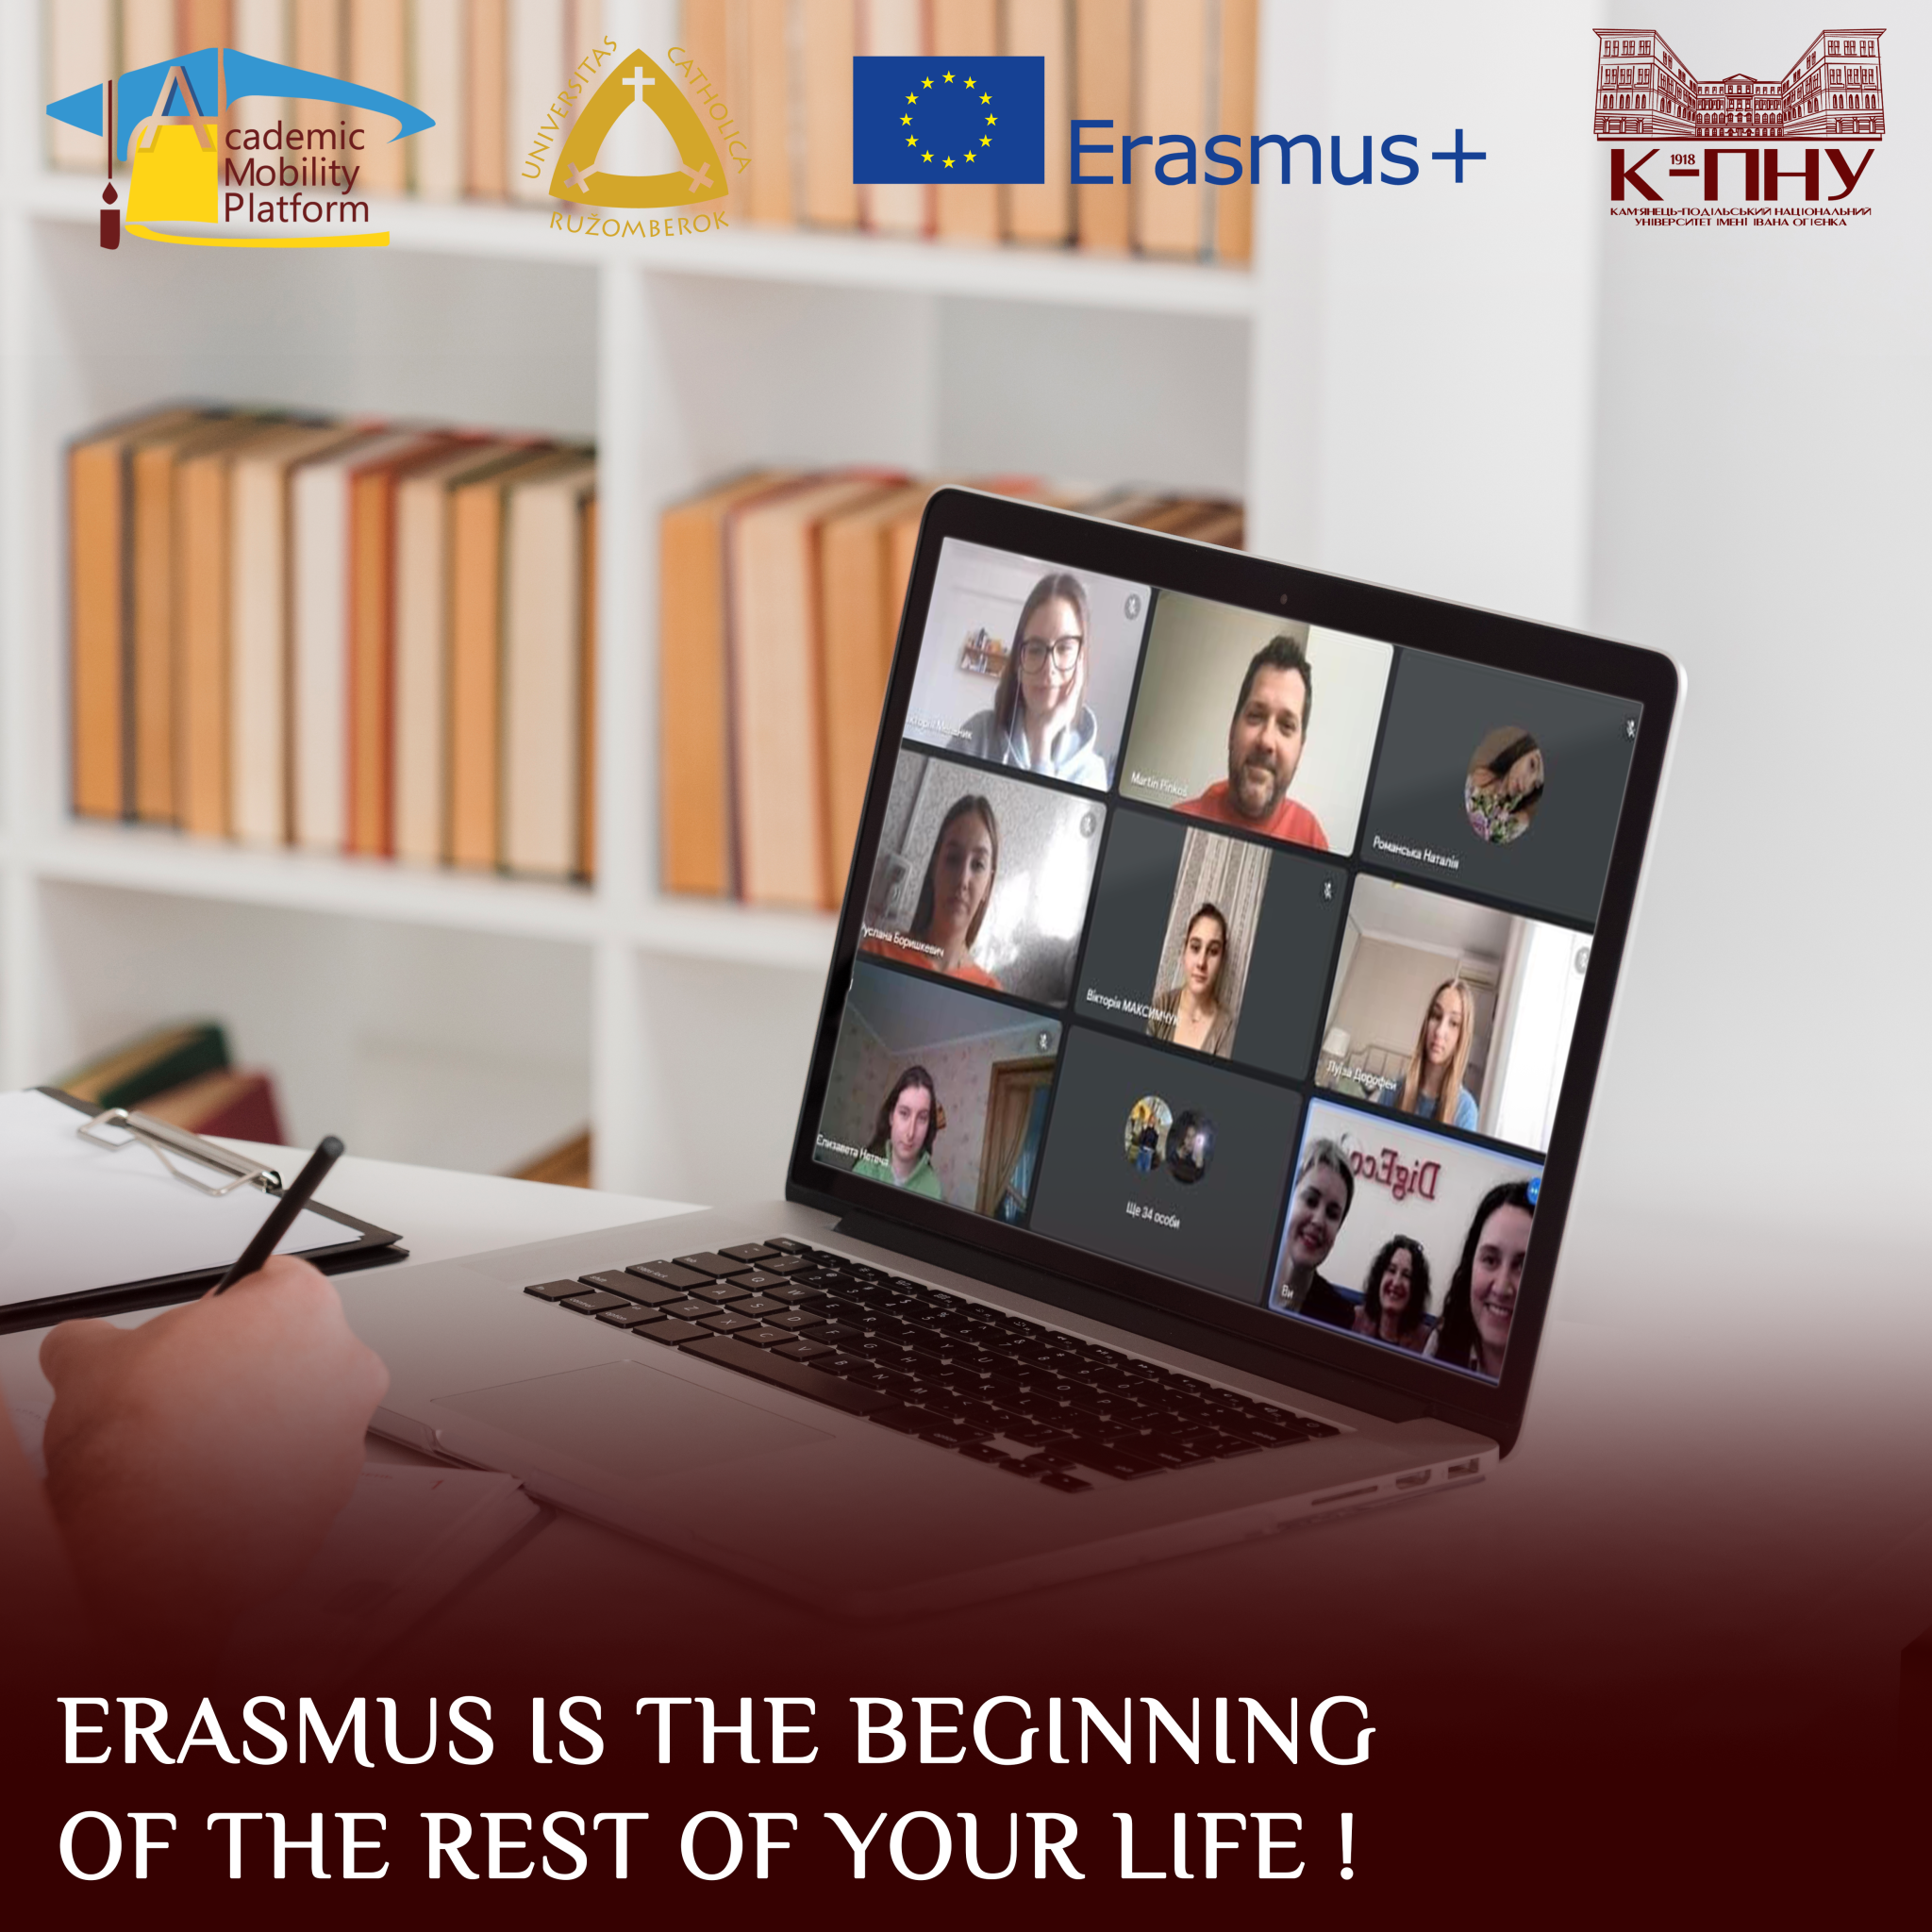 Erasmus is the beginning of the rest of your life!